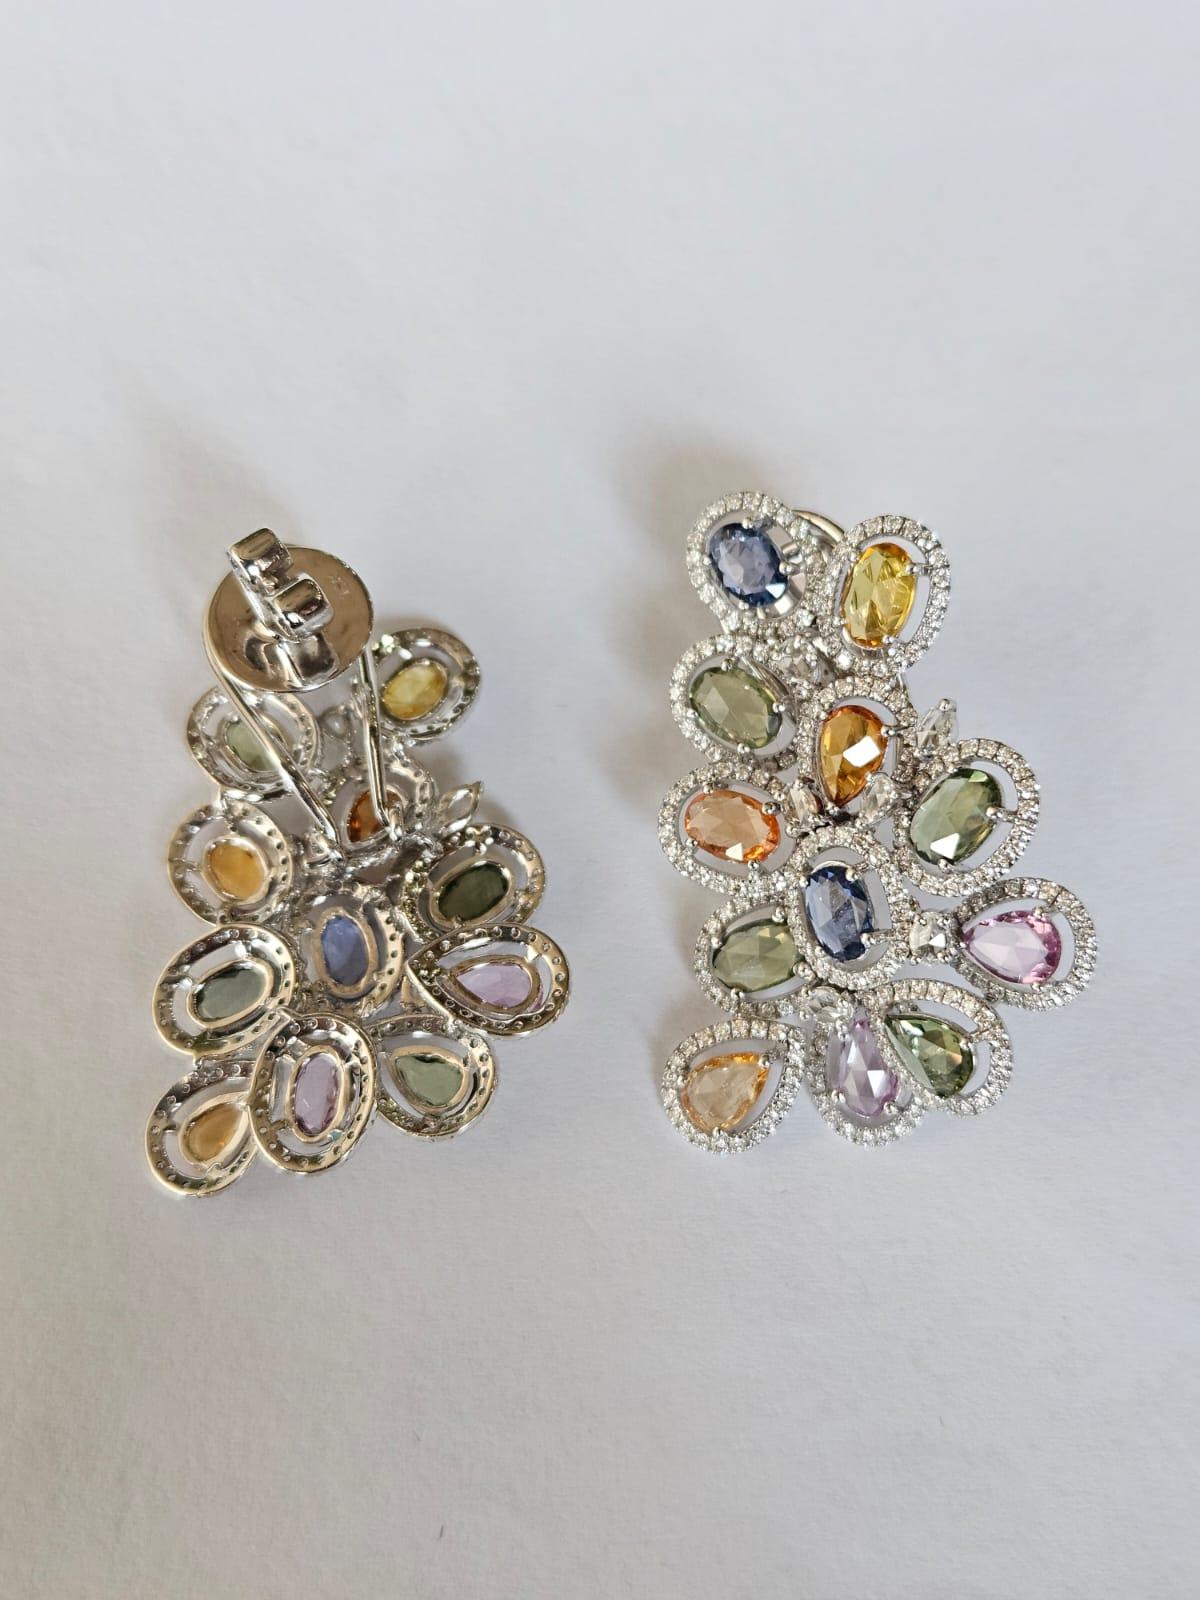 A very gorgeous and interesting, modern style, Multi Sapphires oversized Stud Earrings set in 18K White Gold & Diamonds. The weight of the Multi Sapphires is 9.64 carats. The Multi Sapphires are of Ceylon (Sri Lanka) origin. The combined Diamonds